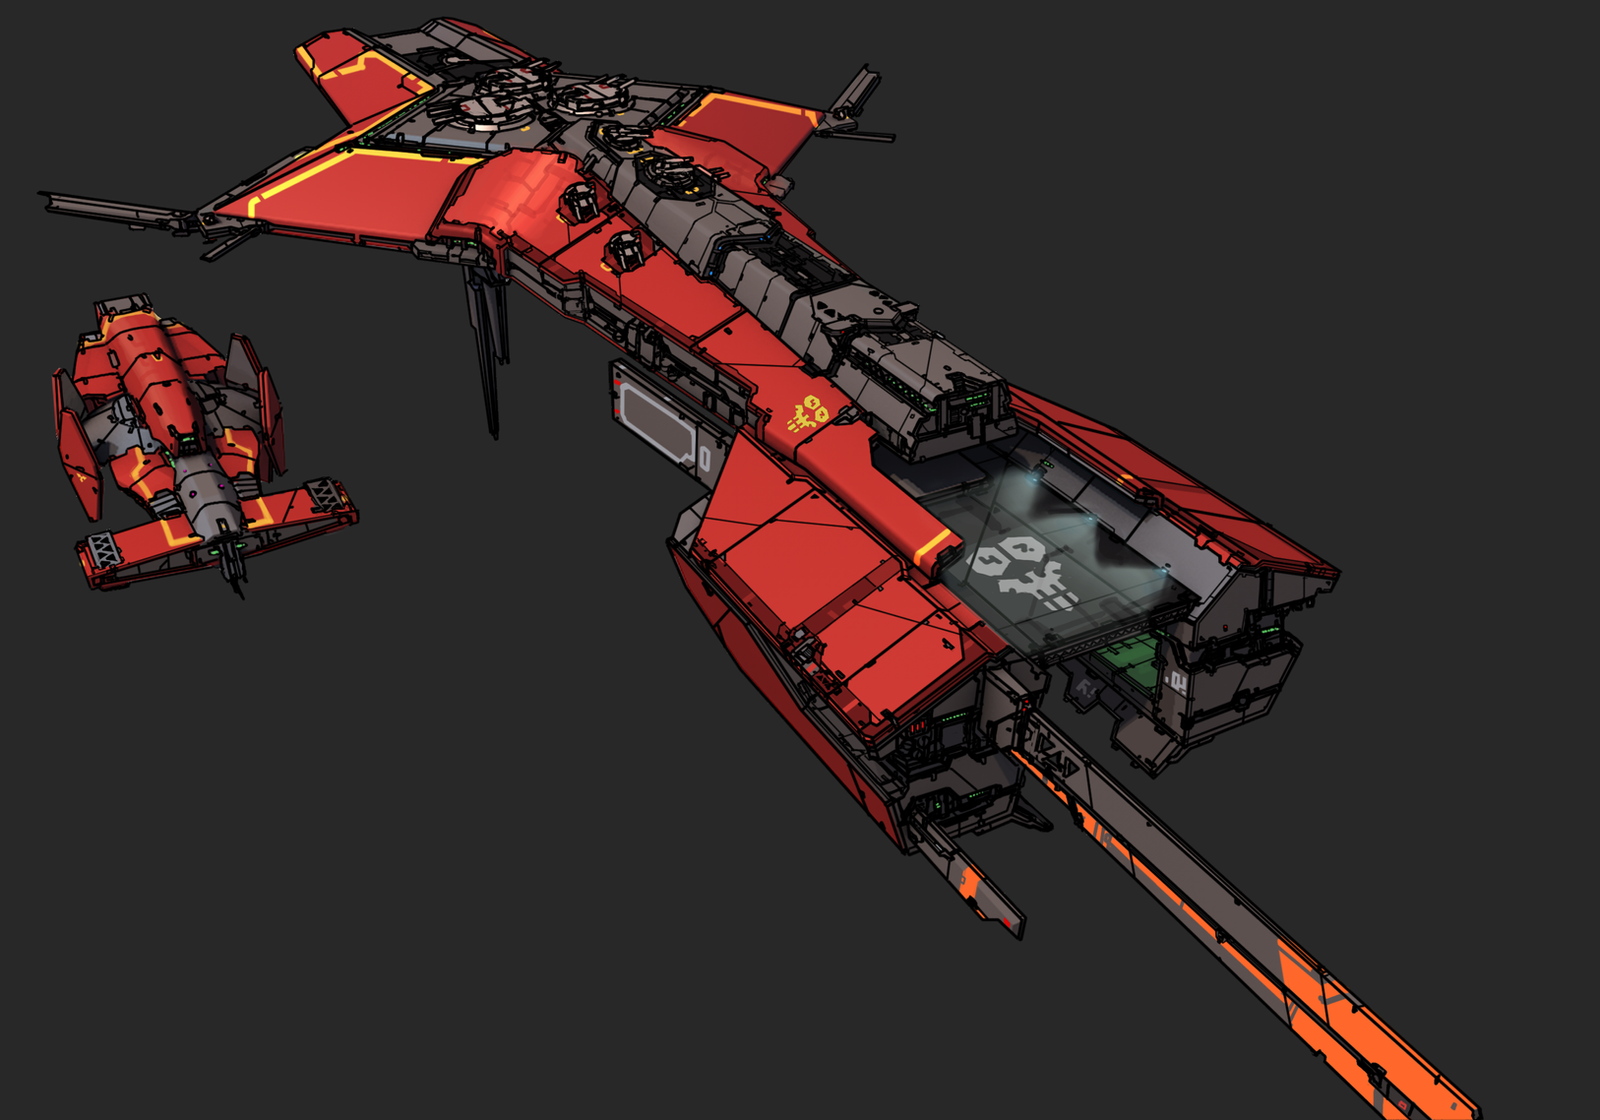 battlecarrier___red_horizon_by_daemoria-d7kuped.png